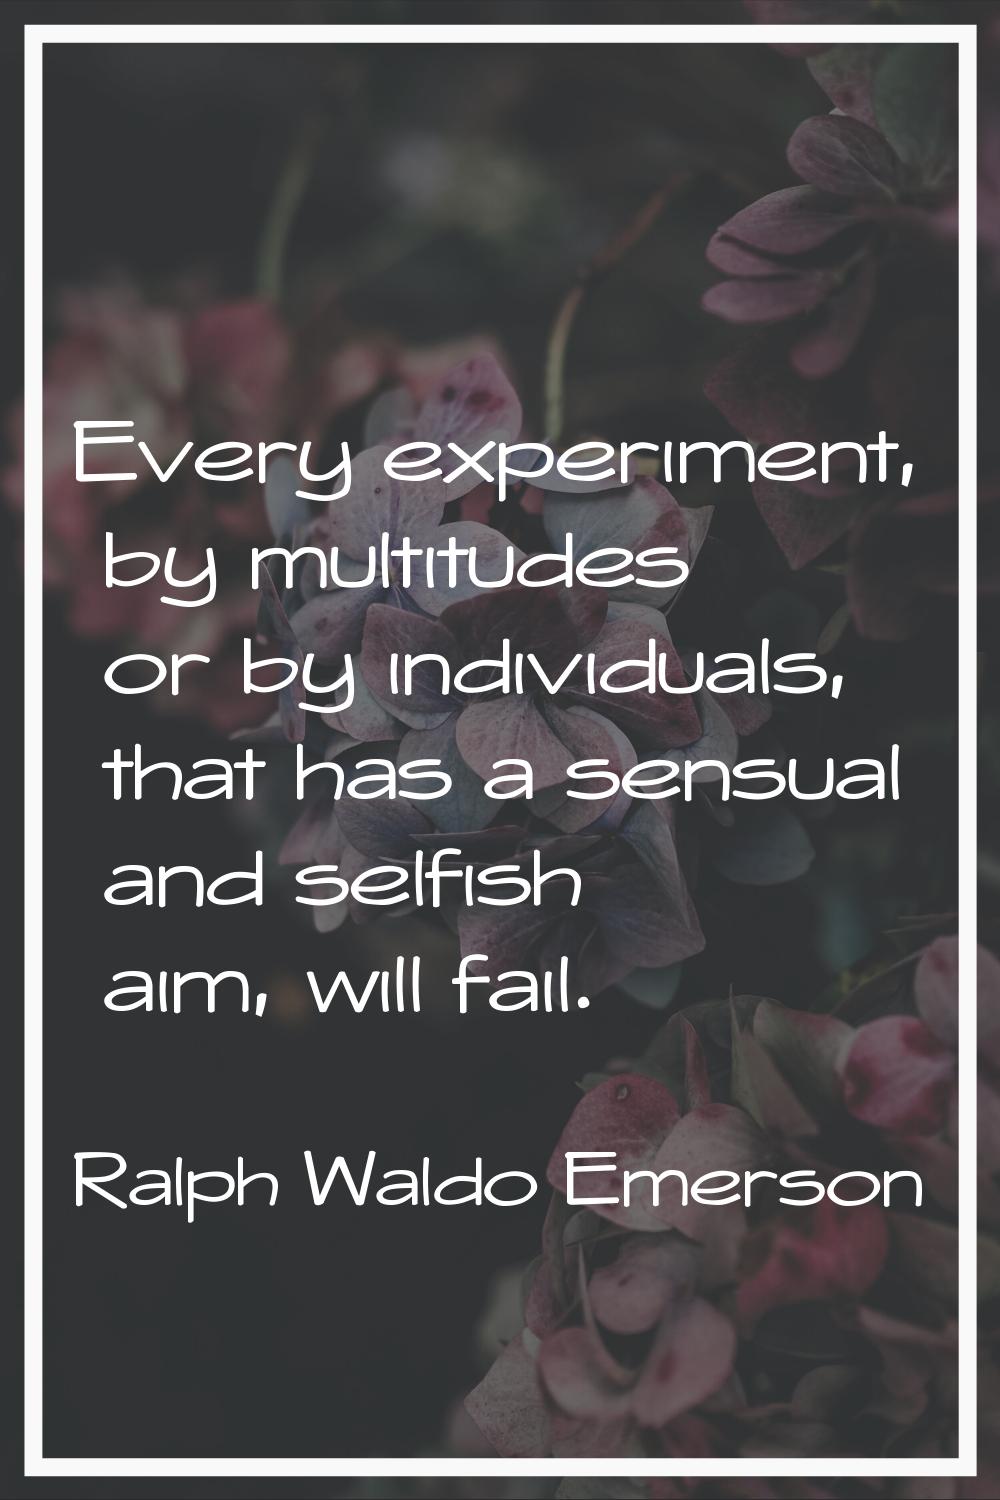 Every experiment, by multitudes or by individuals, that has a sensual and selfish aim, will fail.